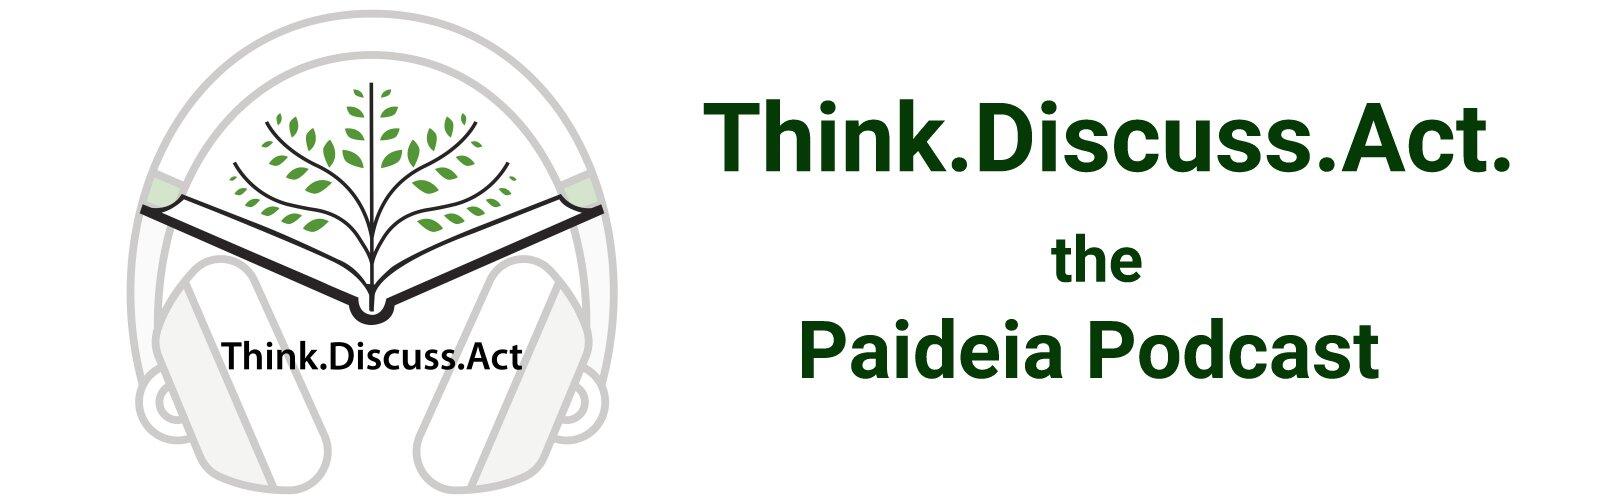 Think.Discuss.Act. - the Paideia Podcast